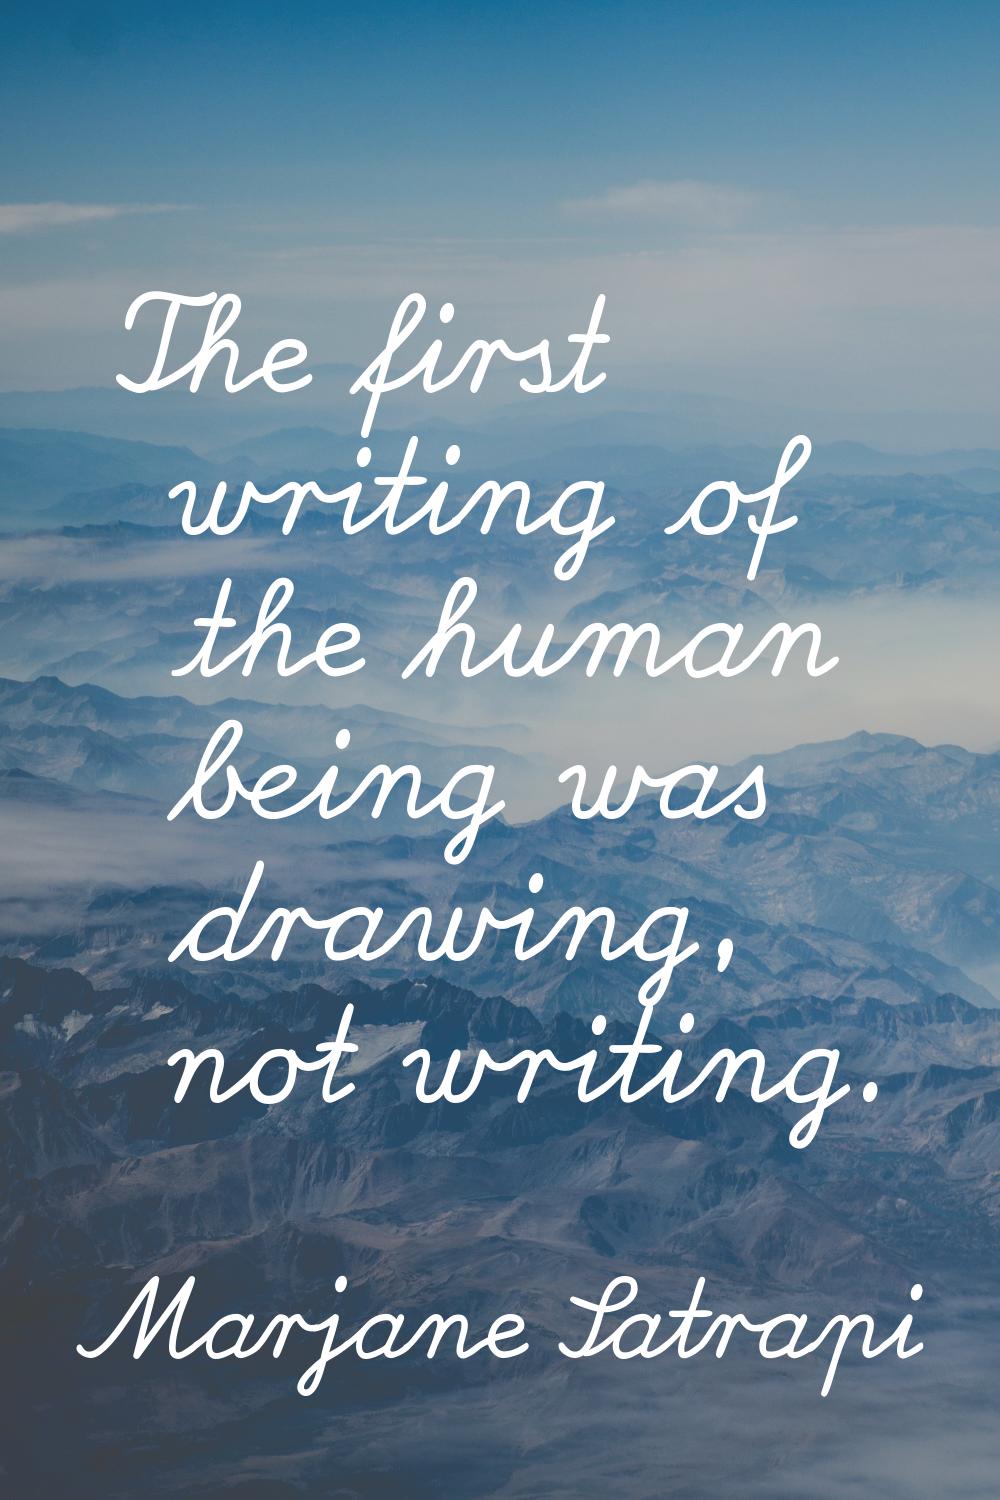 The first writing of the human being was drawing, not writing.